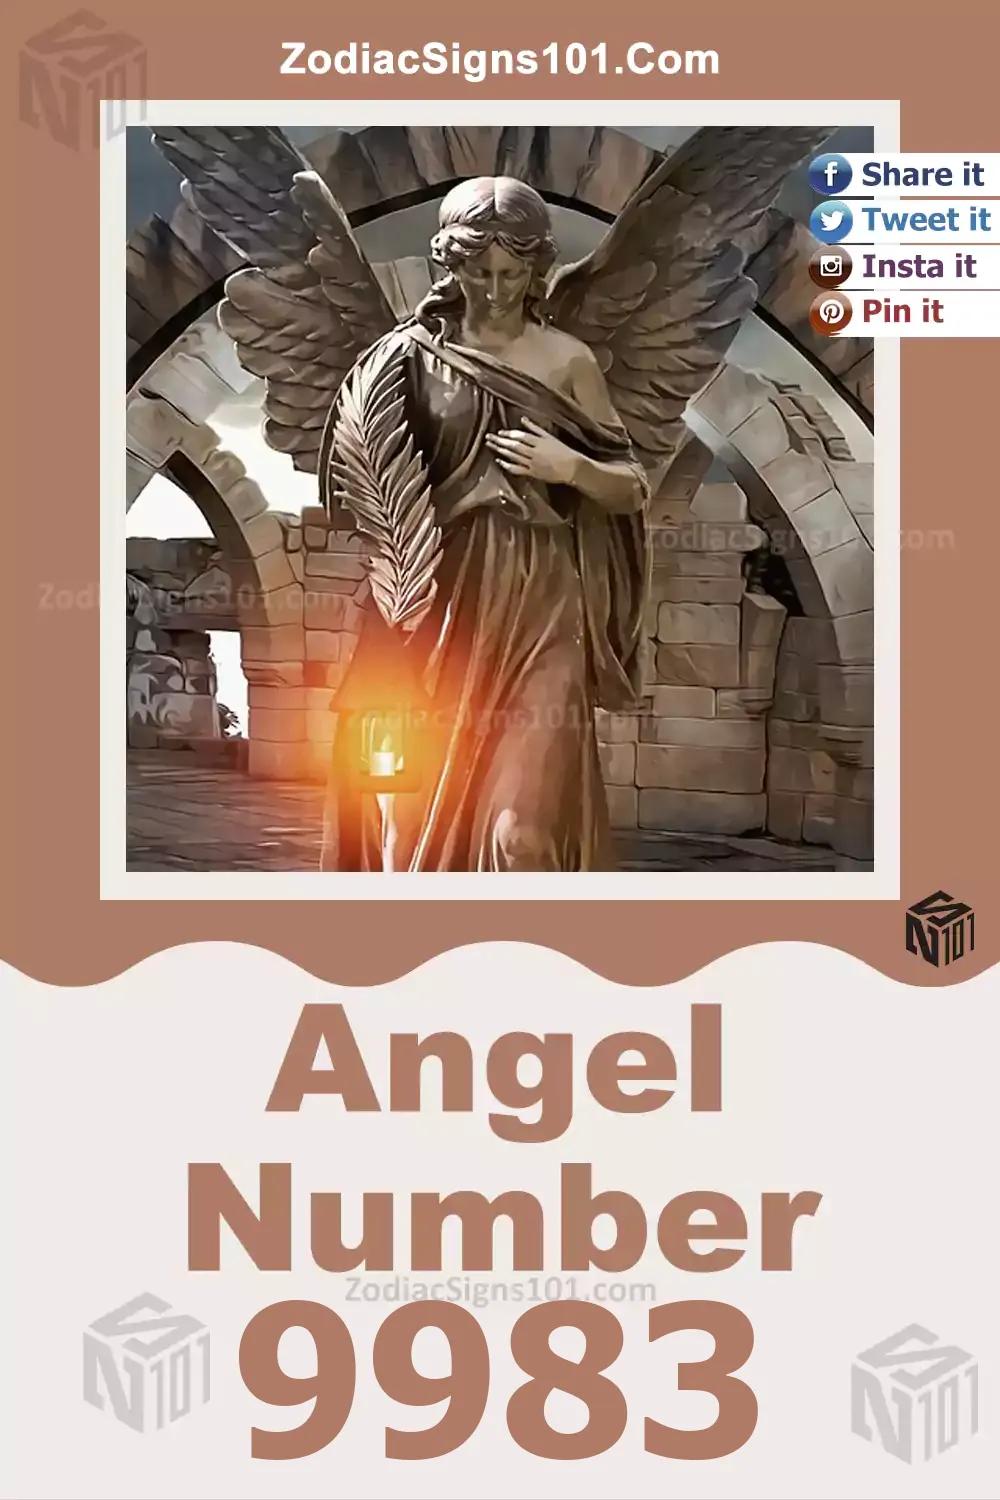 9983 Angel Number Meaning